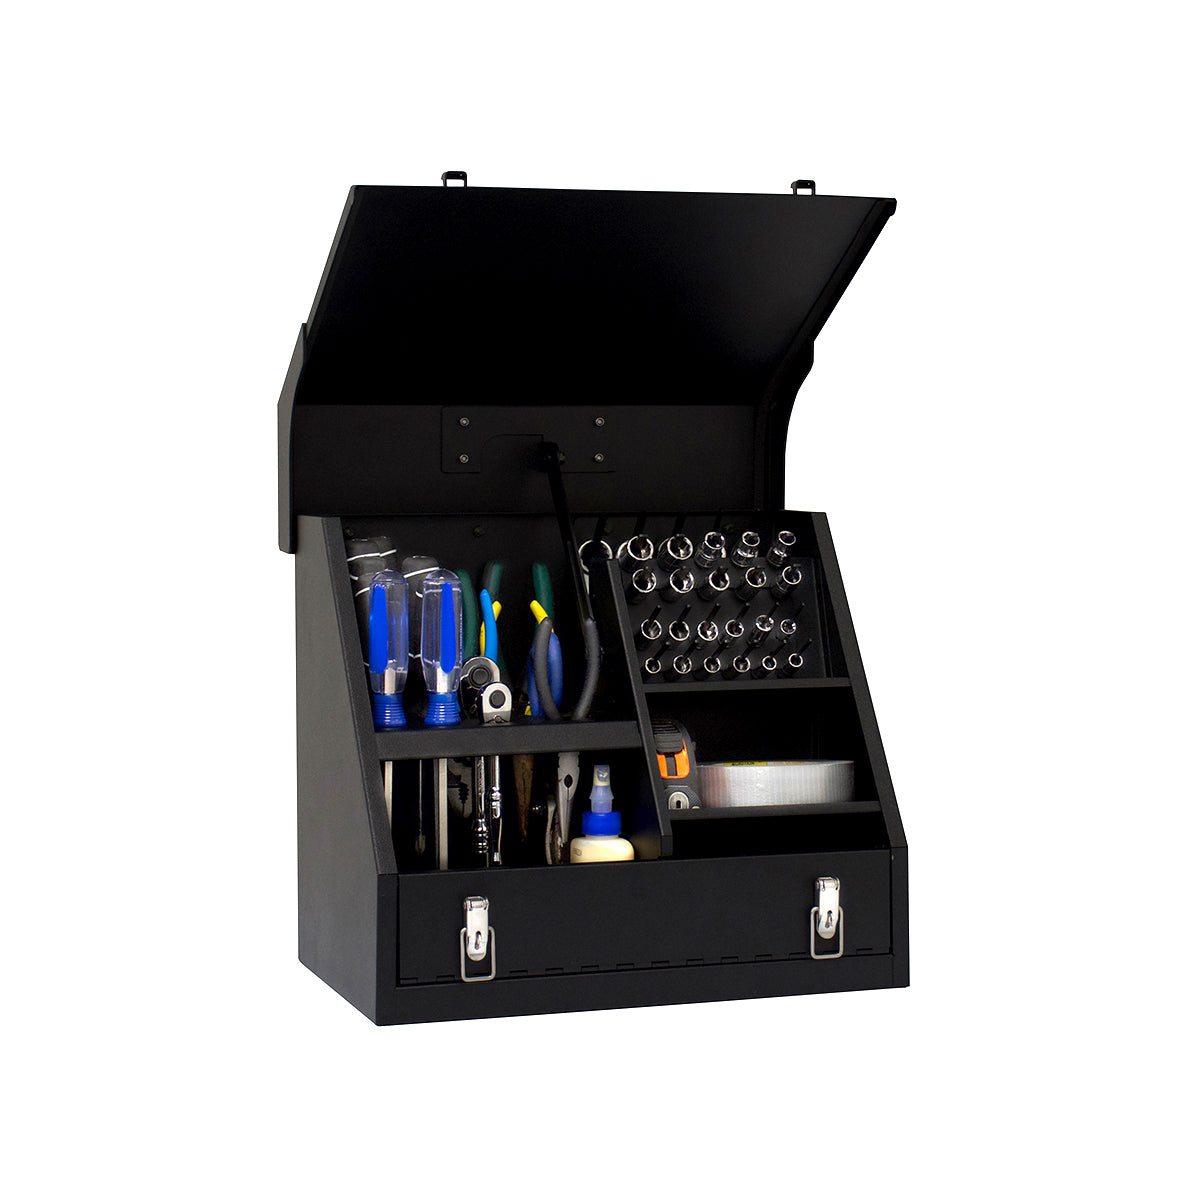 23 x 14 in. Steel Triangle® Toolbox